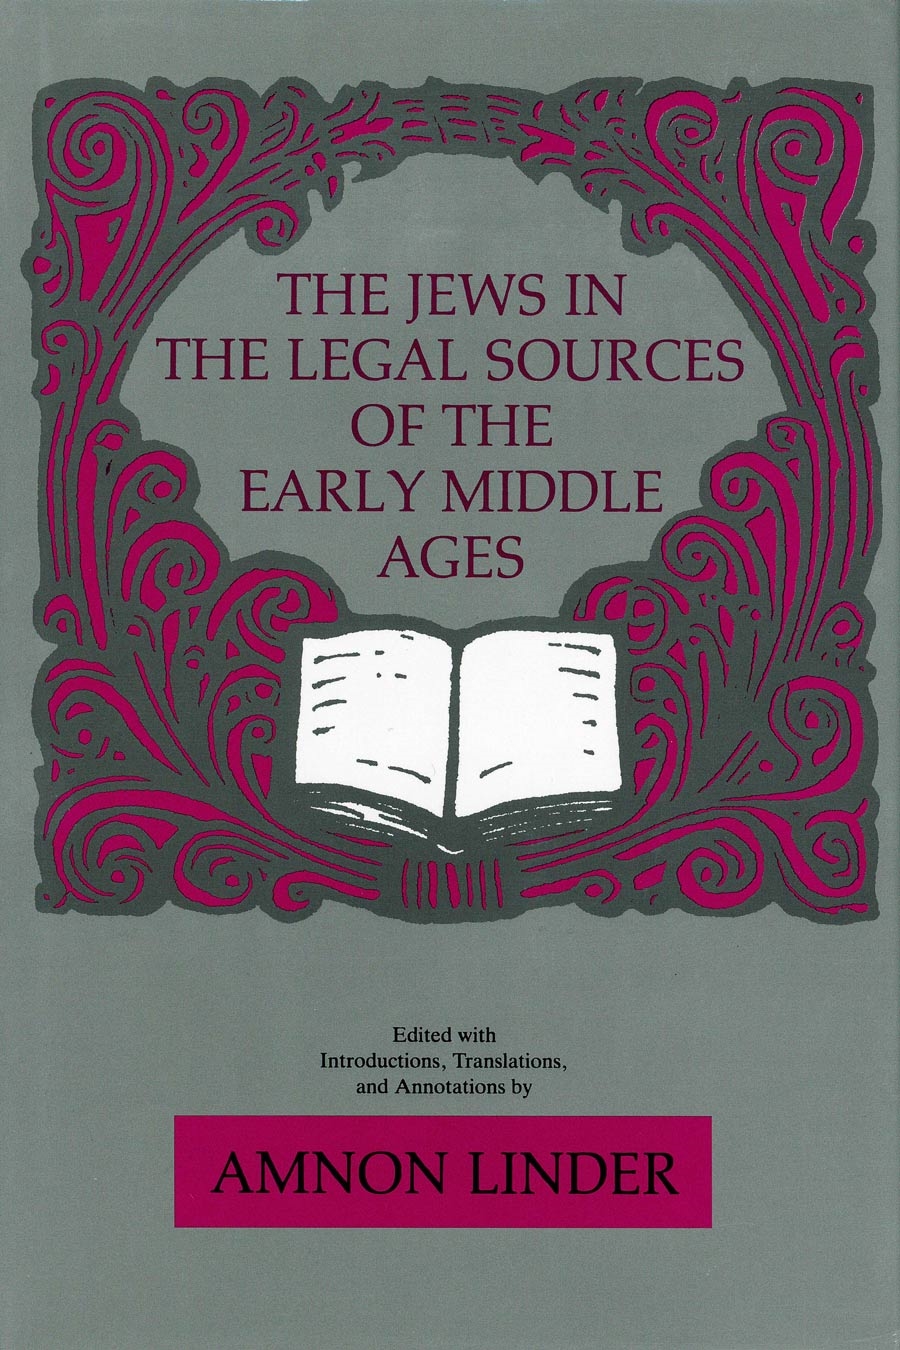 The Jews in the Legal Sources of the Early Middle Ages